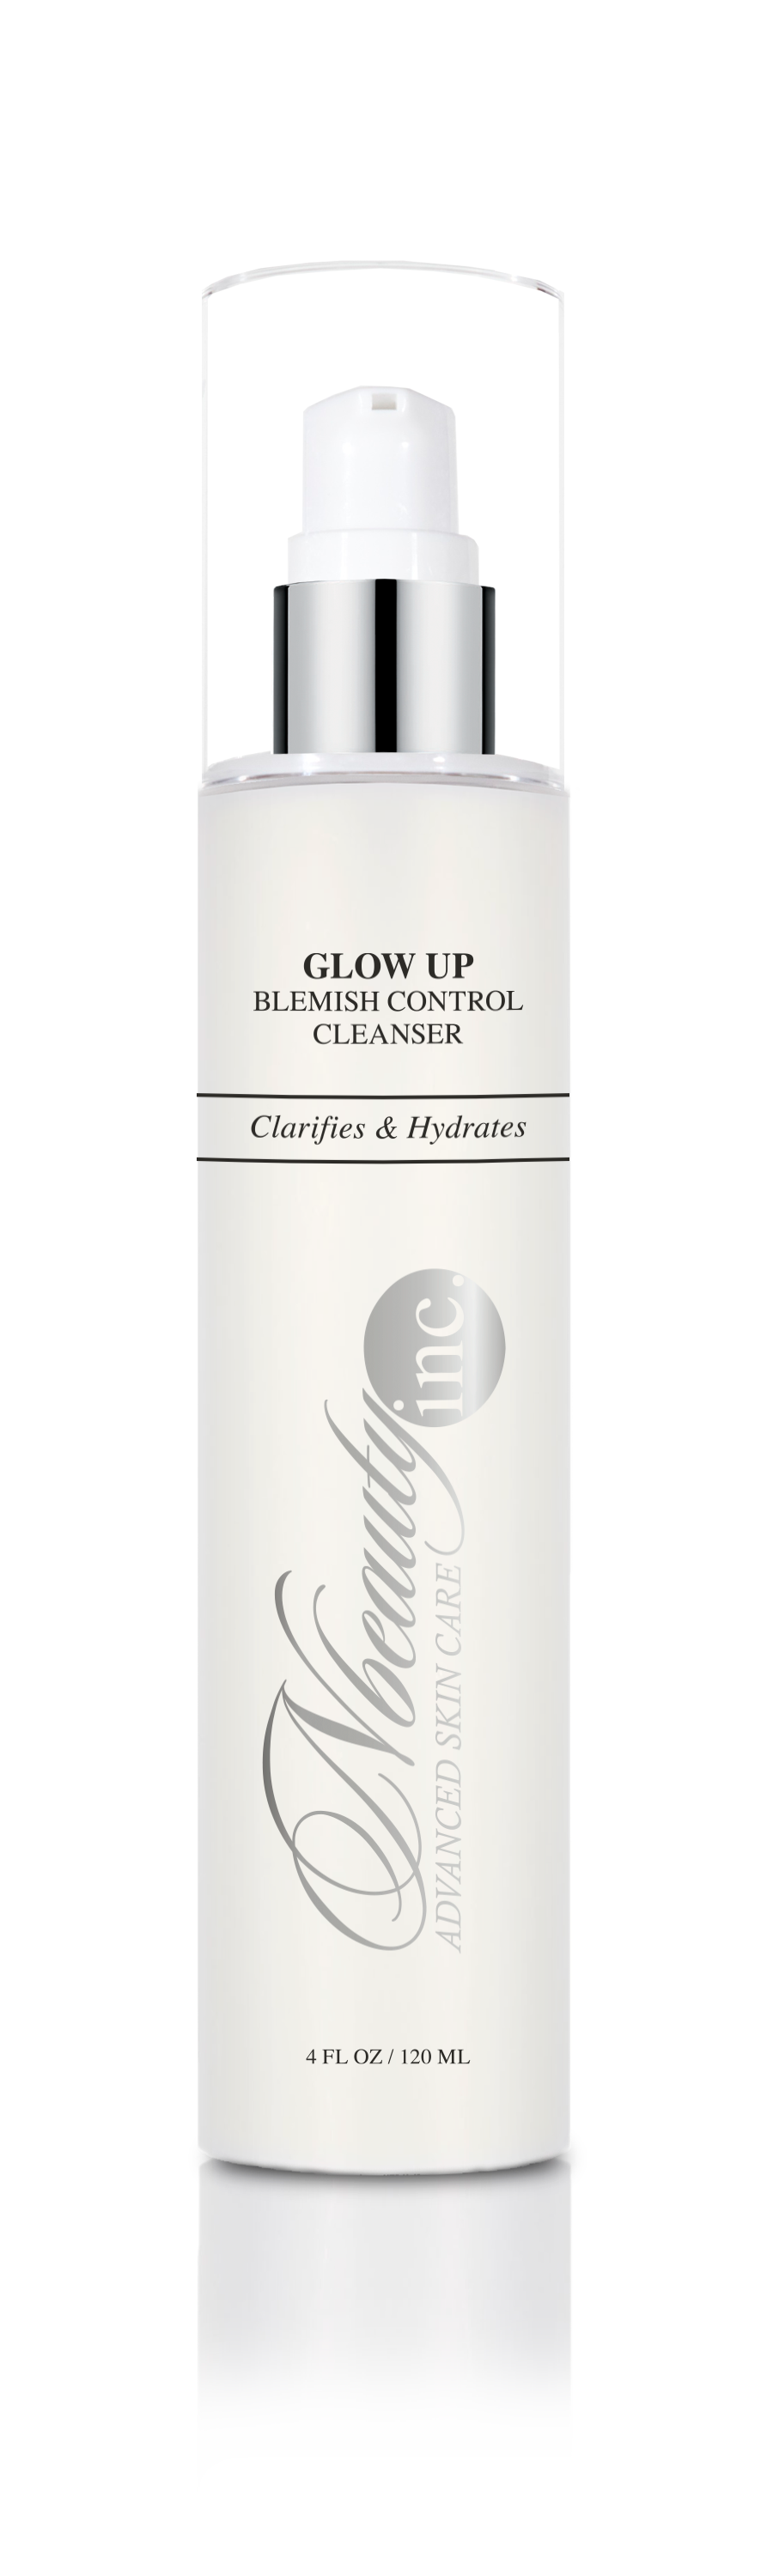 Glow Up Blemish Control Cleanser